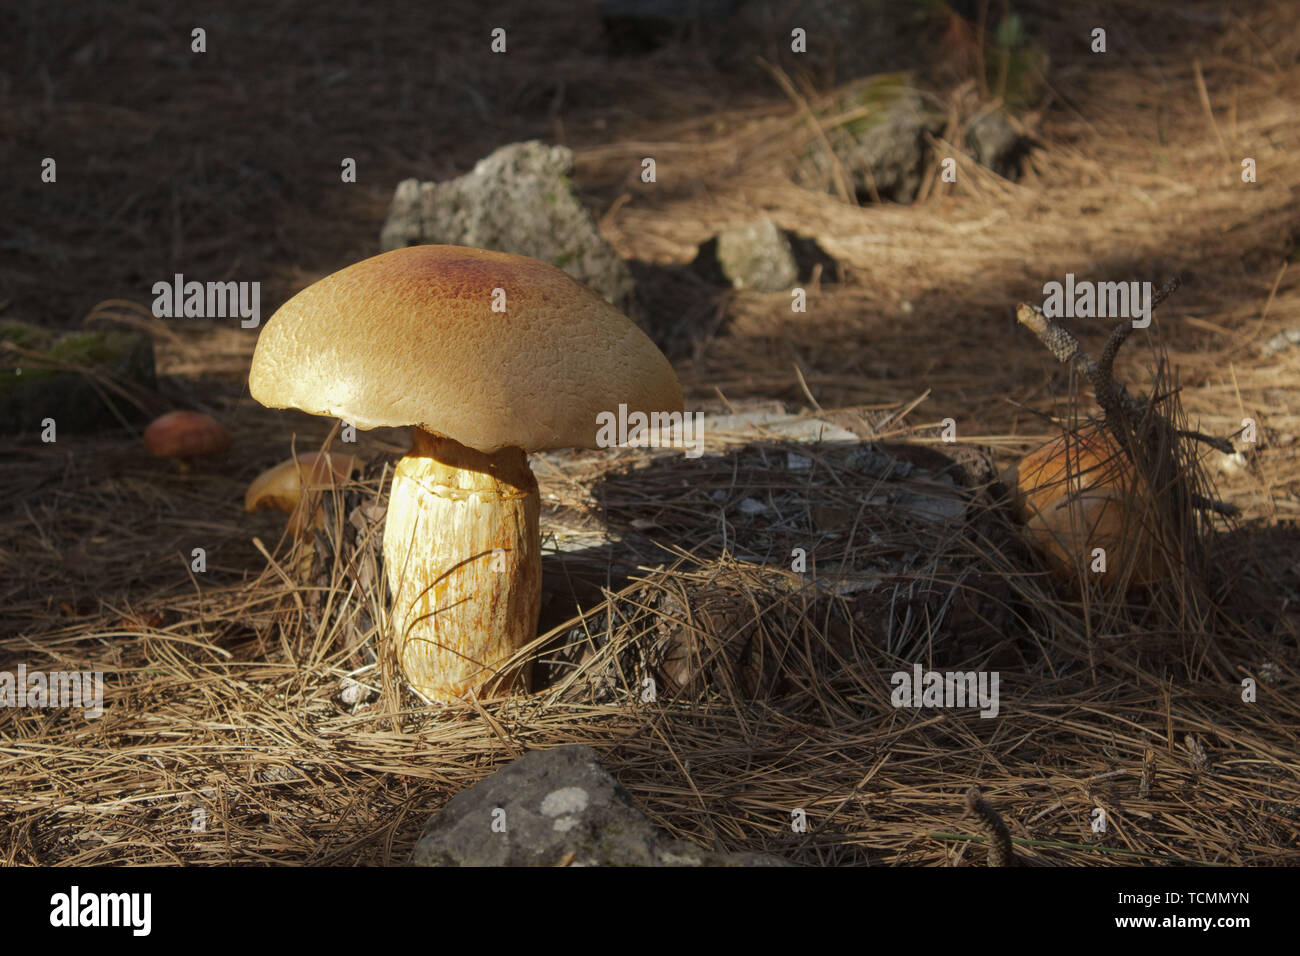 Close-up of spherical orange mushrooms on a pine stump surrounded by pine needles and stones. Stock Photo